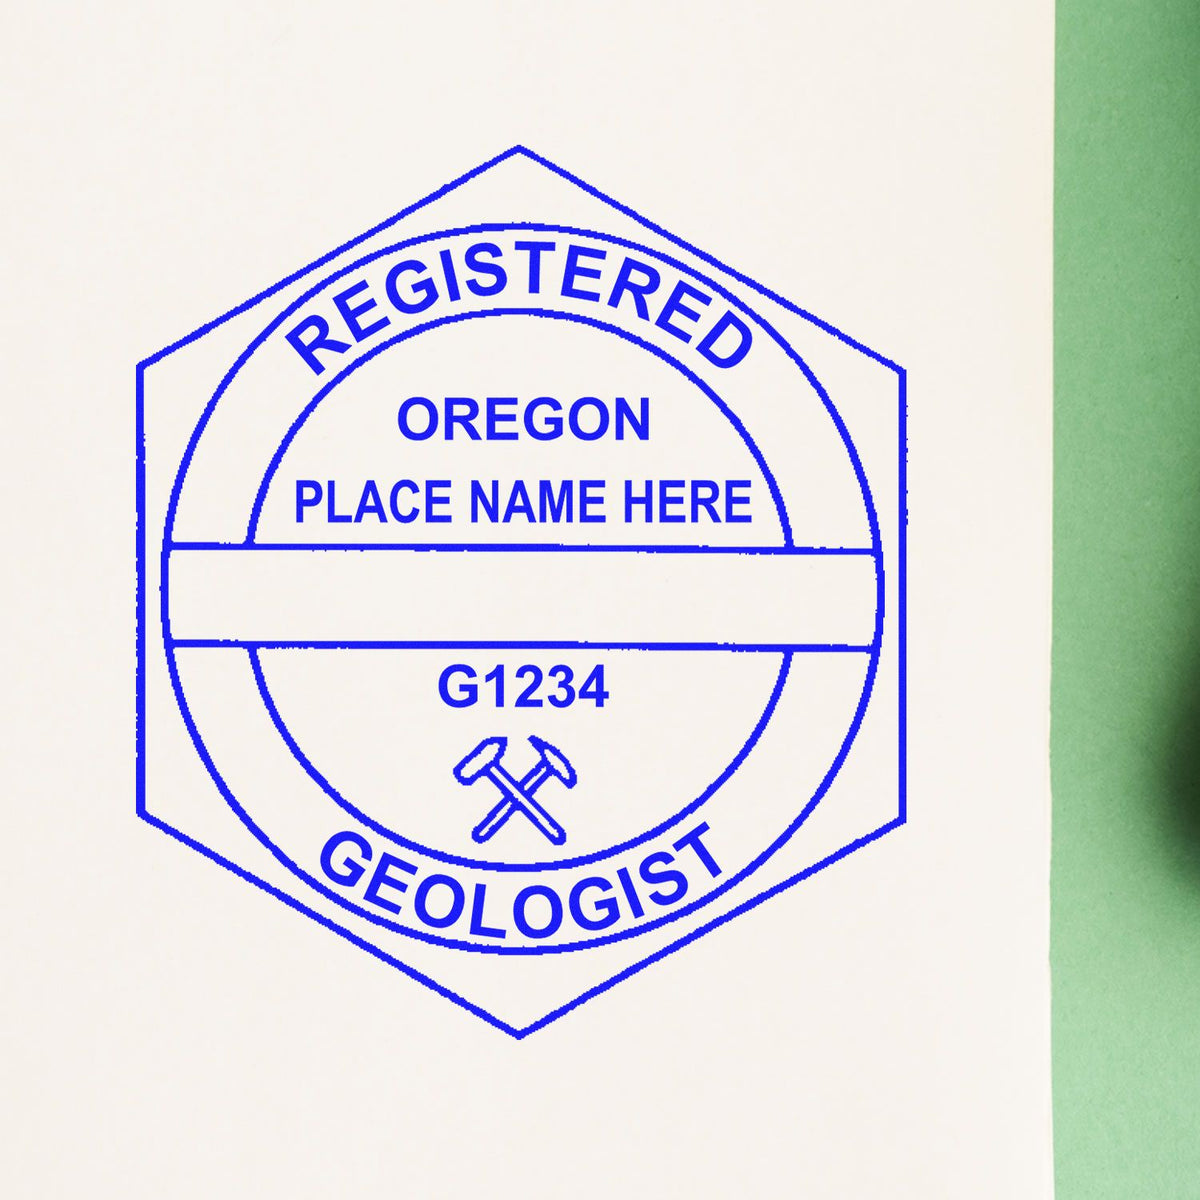 An alternative view of the Slim Pre-Inked Oregon Professional Geologist Seal Stamp stamped on a sheet of paper showing the image in use